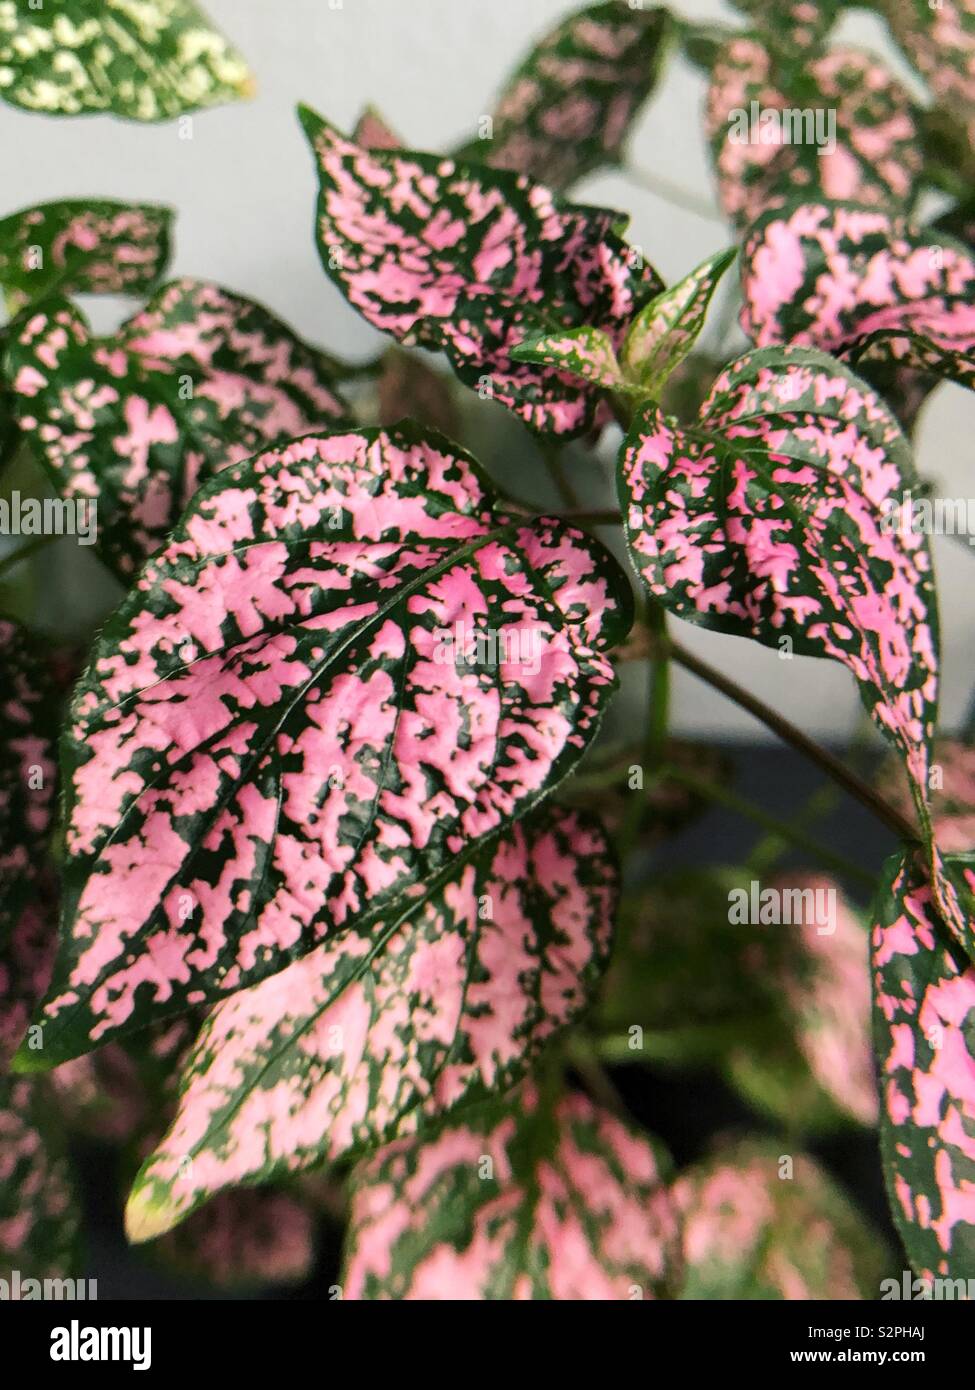 Close up leaves of hypoestes phyllostachya plant. Stock Photo